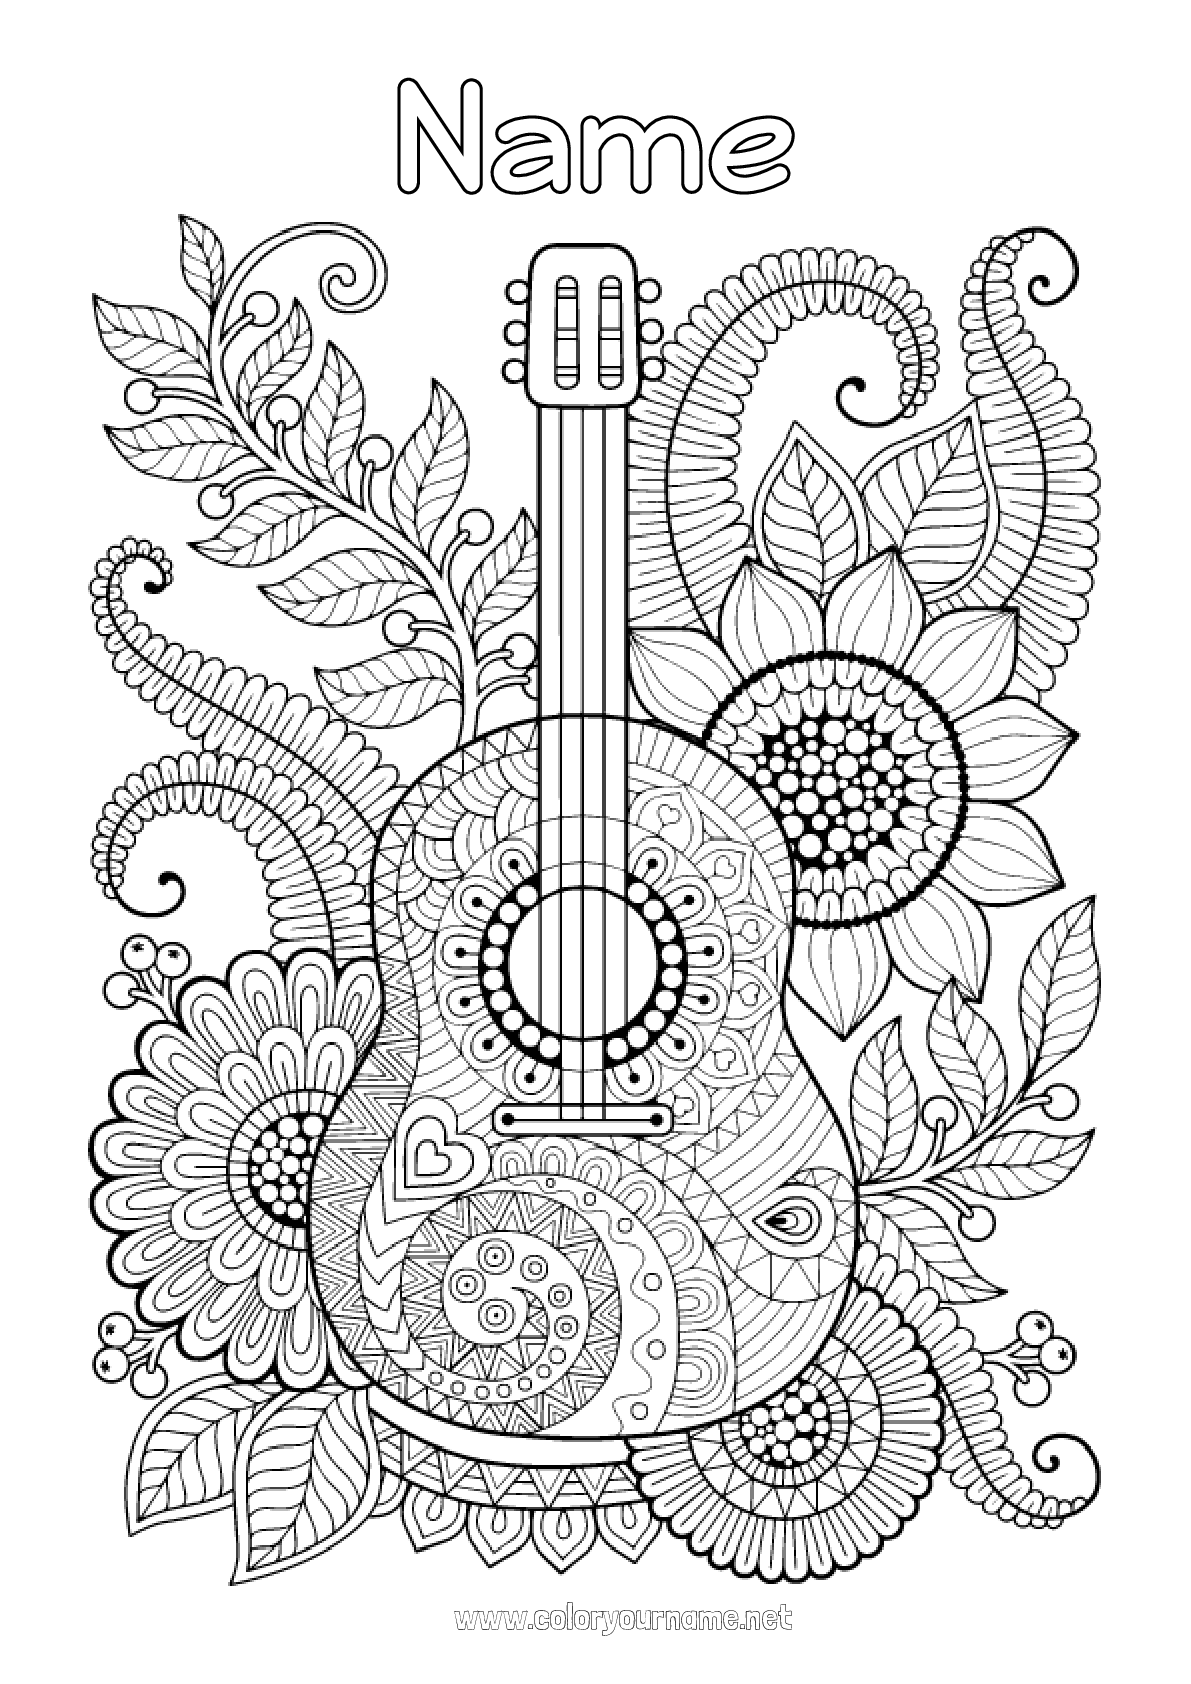 acoustic guitar coloring page